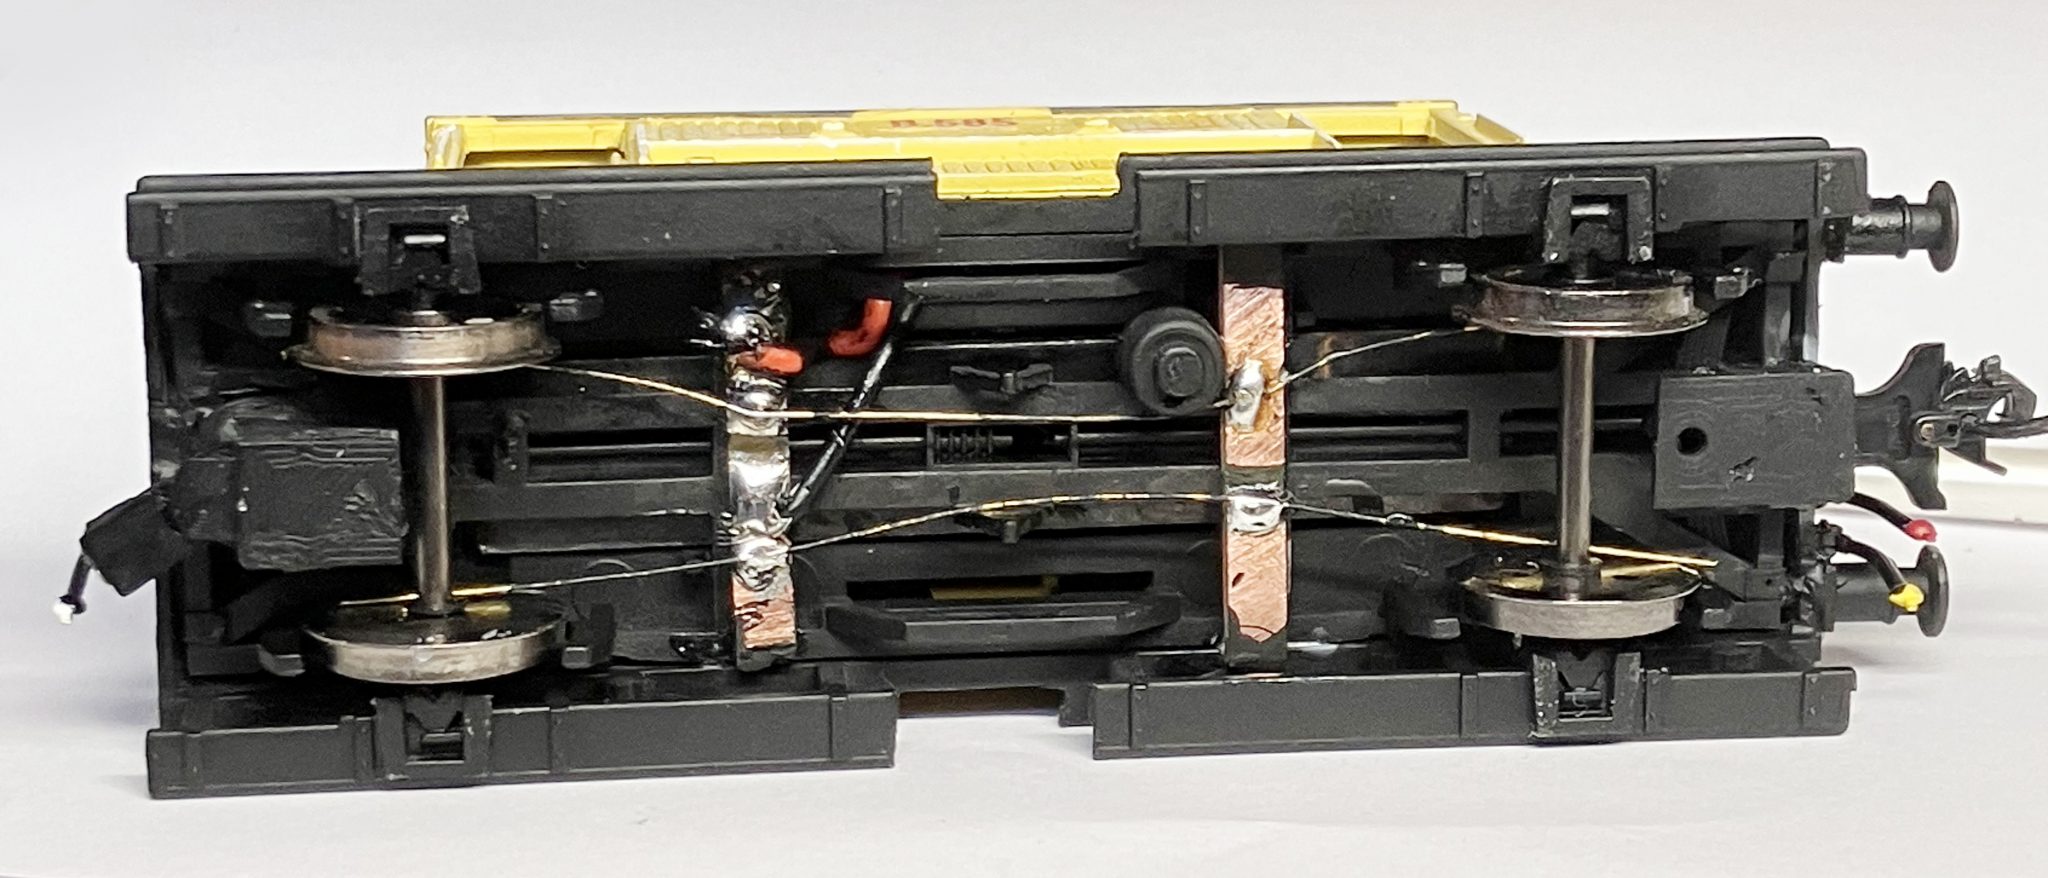 Electrical pickups contact the backs of the wheel flanges to carry DCC current to the the stay-alive inputs (red and black wires visible in this shot). The stay-alive unit's bridge rectifier then converts that DCC flat waveform signal to DC current.